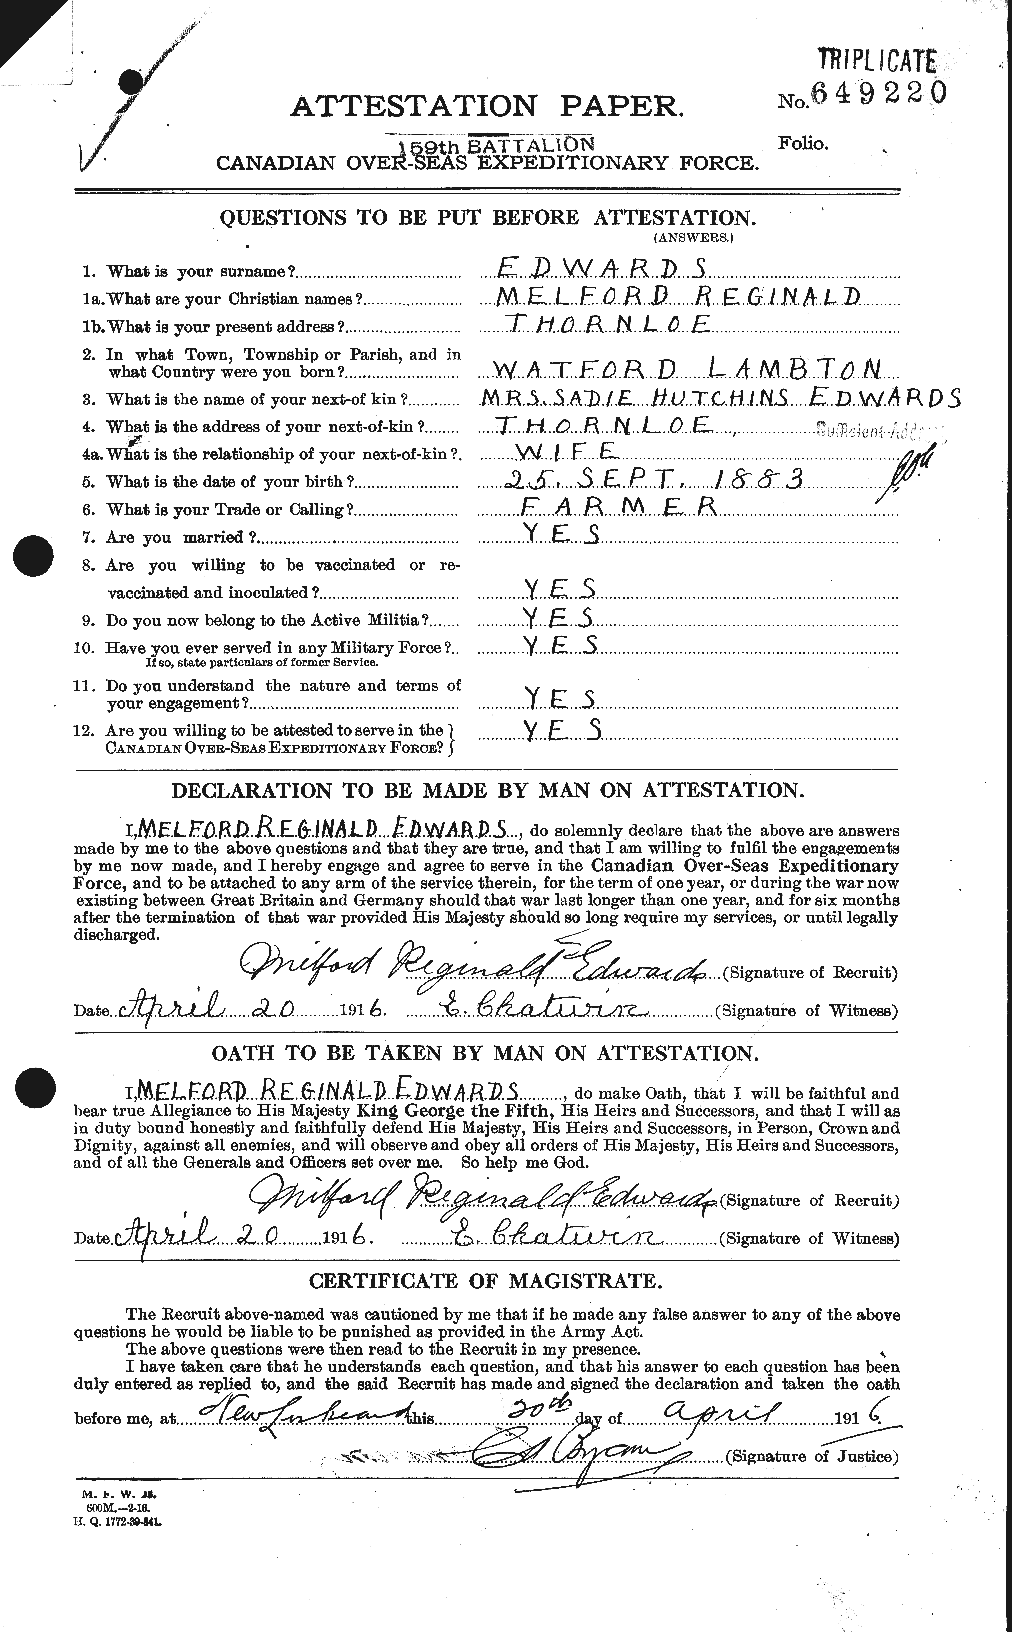 Personnel Records of the First World War - CEF 310214a